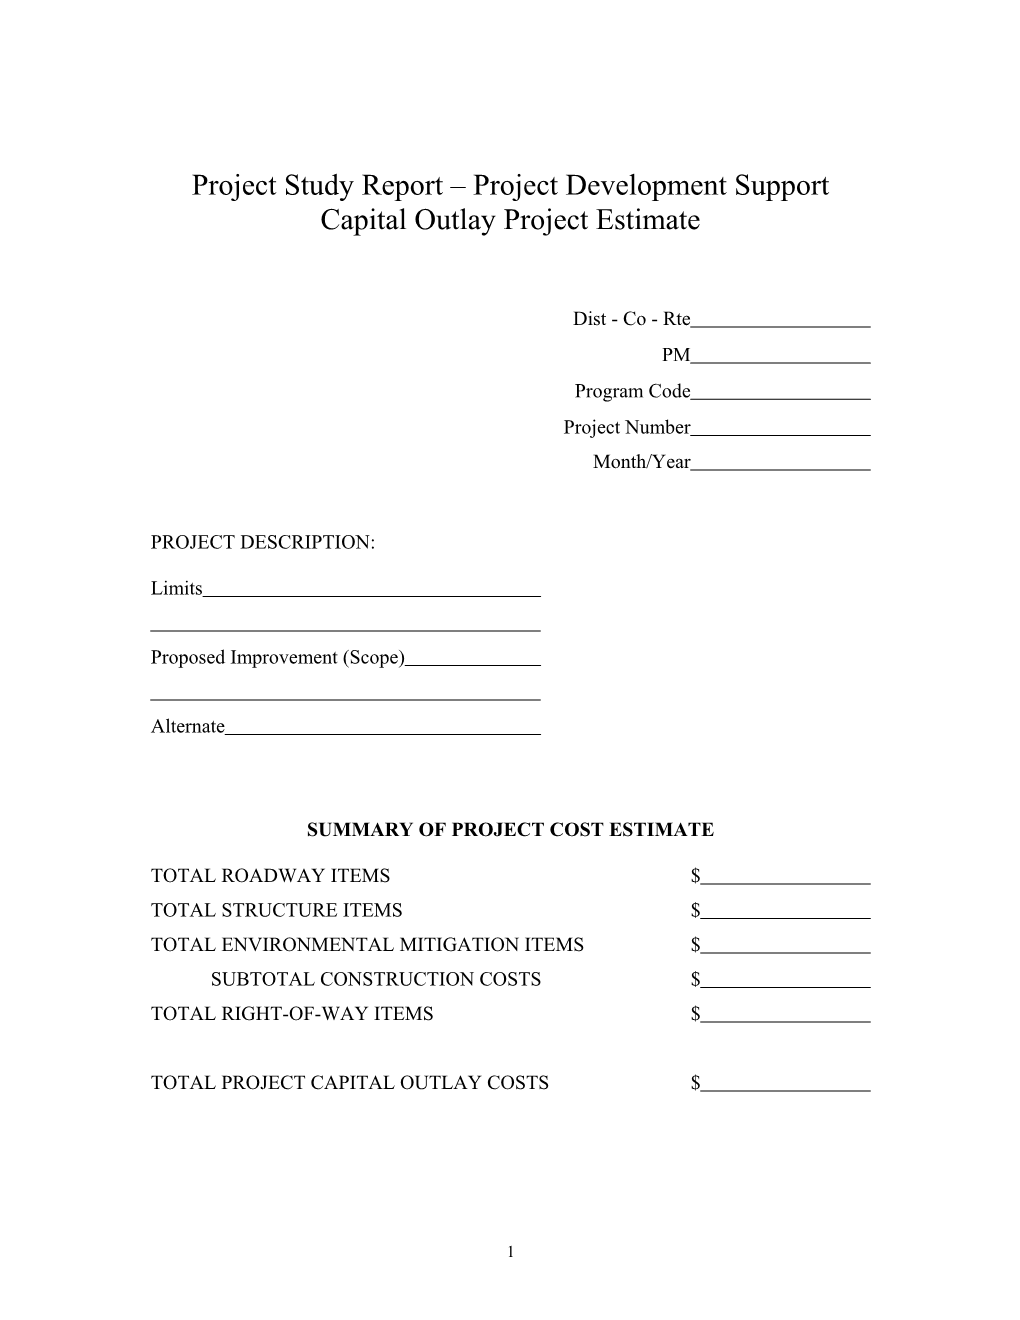 Project Study Report Project Development Supportcapital Outlay Project Estimate